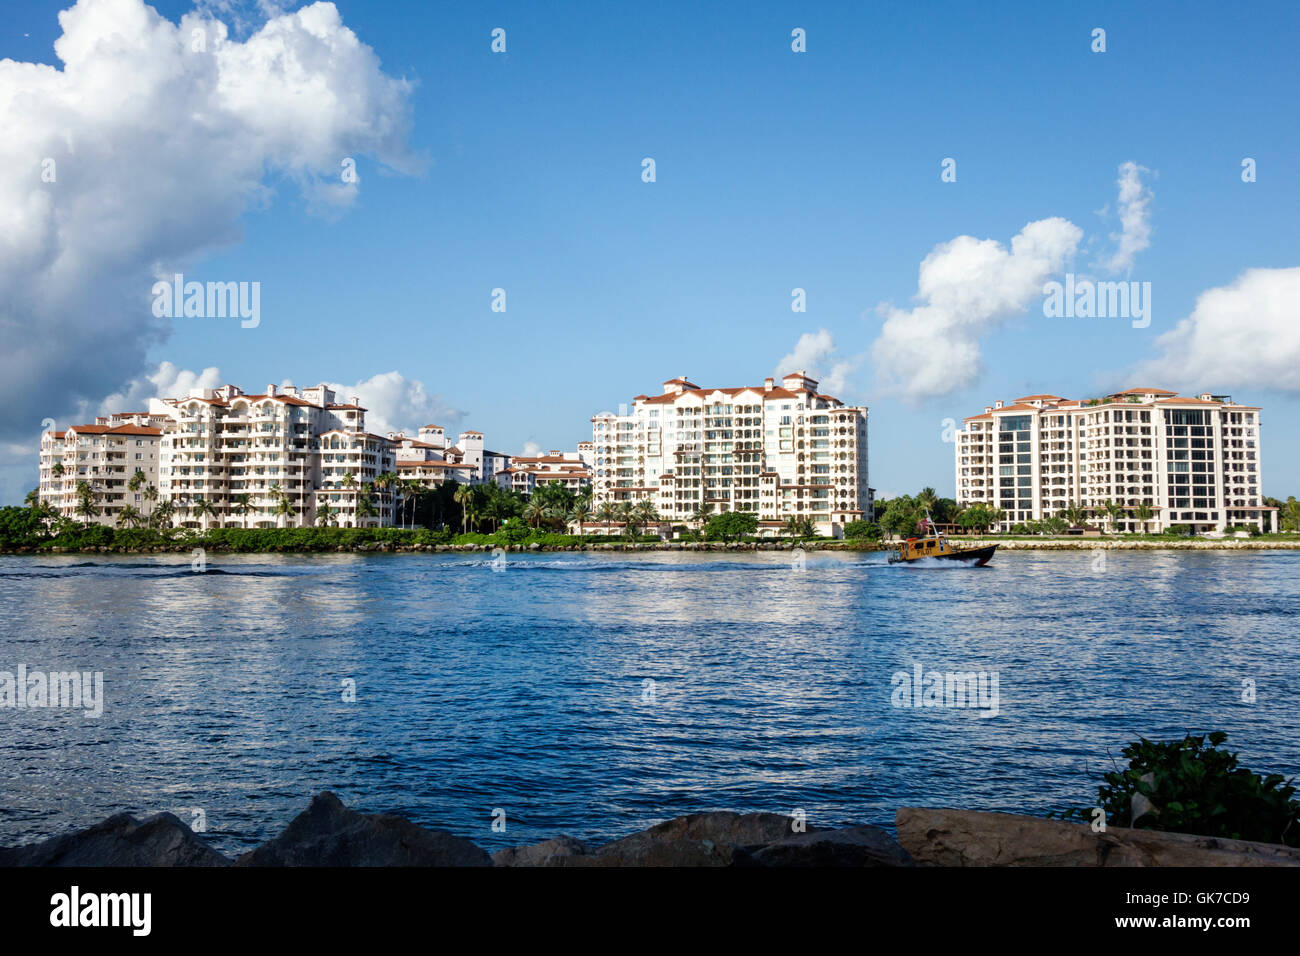 Miami Beach Florida,South Beach,Fisher Island,Government Cut,shipping channel,millionaires enclave,condominium residences,high-rise,high-rise,building Stock Photo